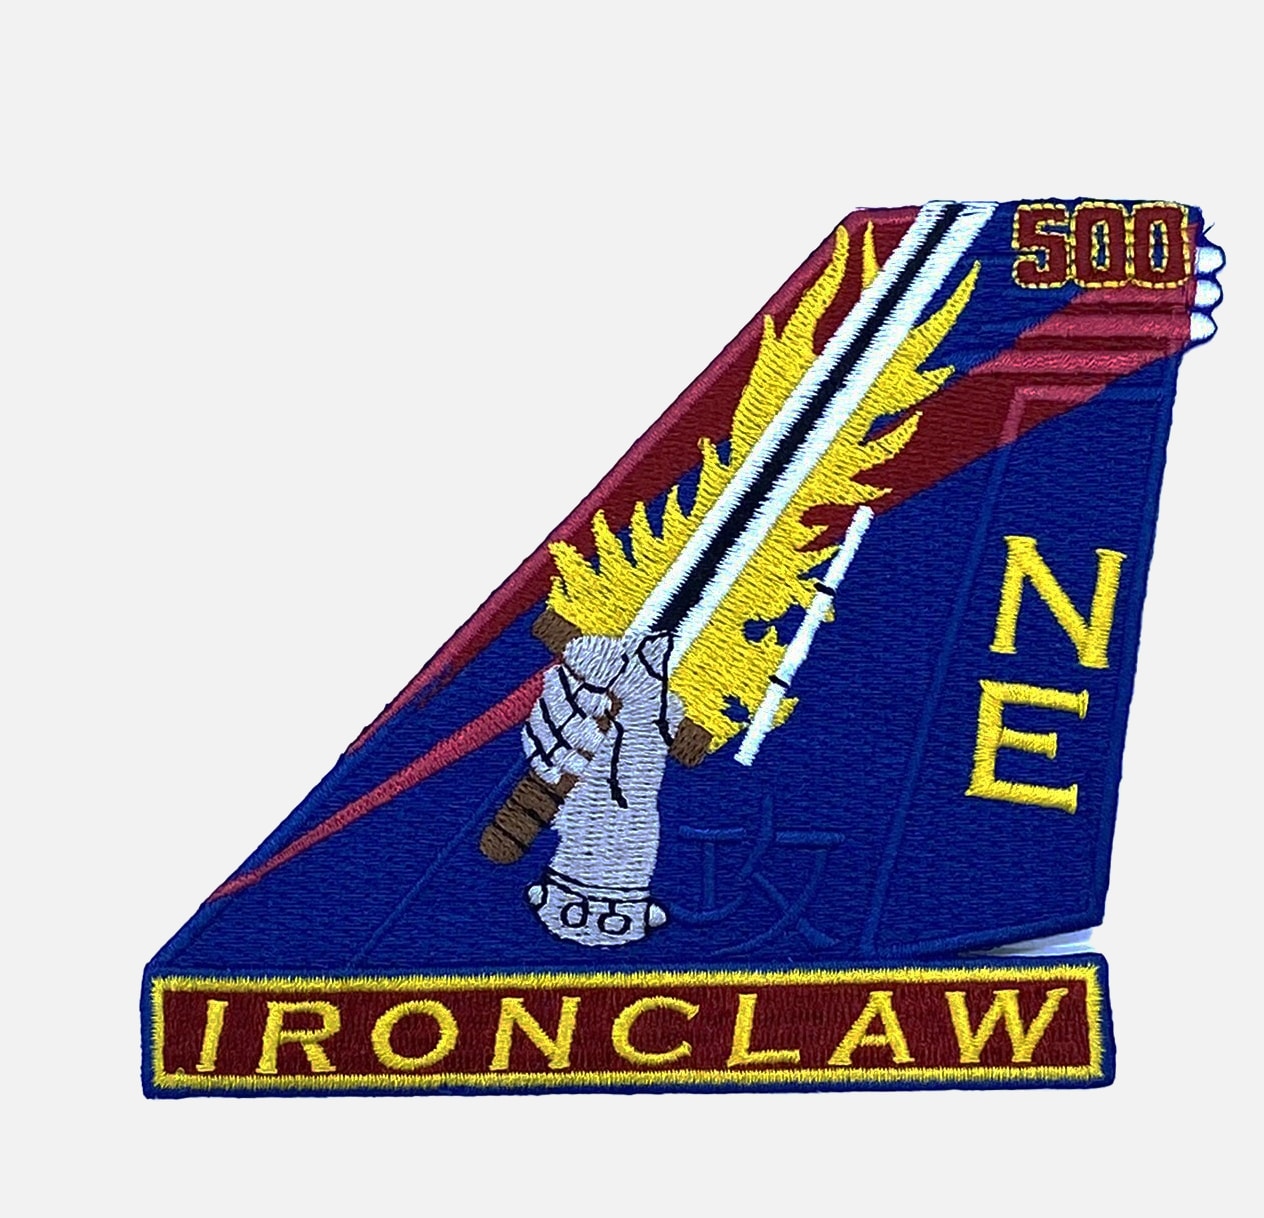 VAQ-136 Gauntlets Ironclaw Tail Flash Patch – Sew On